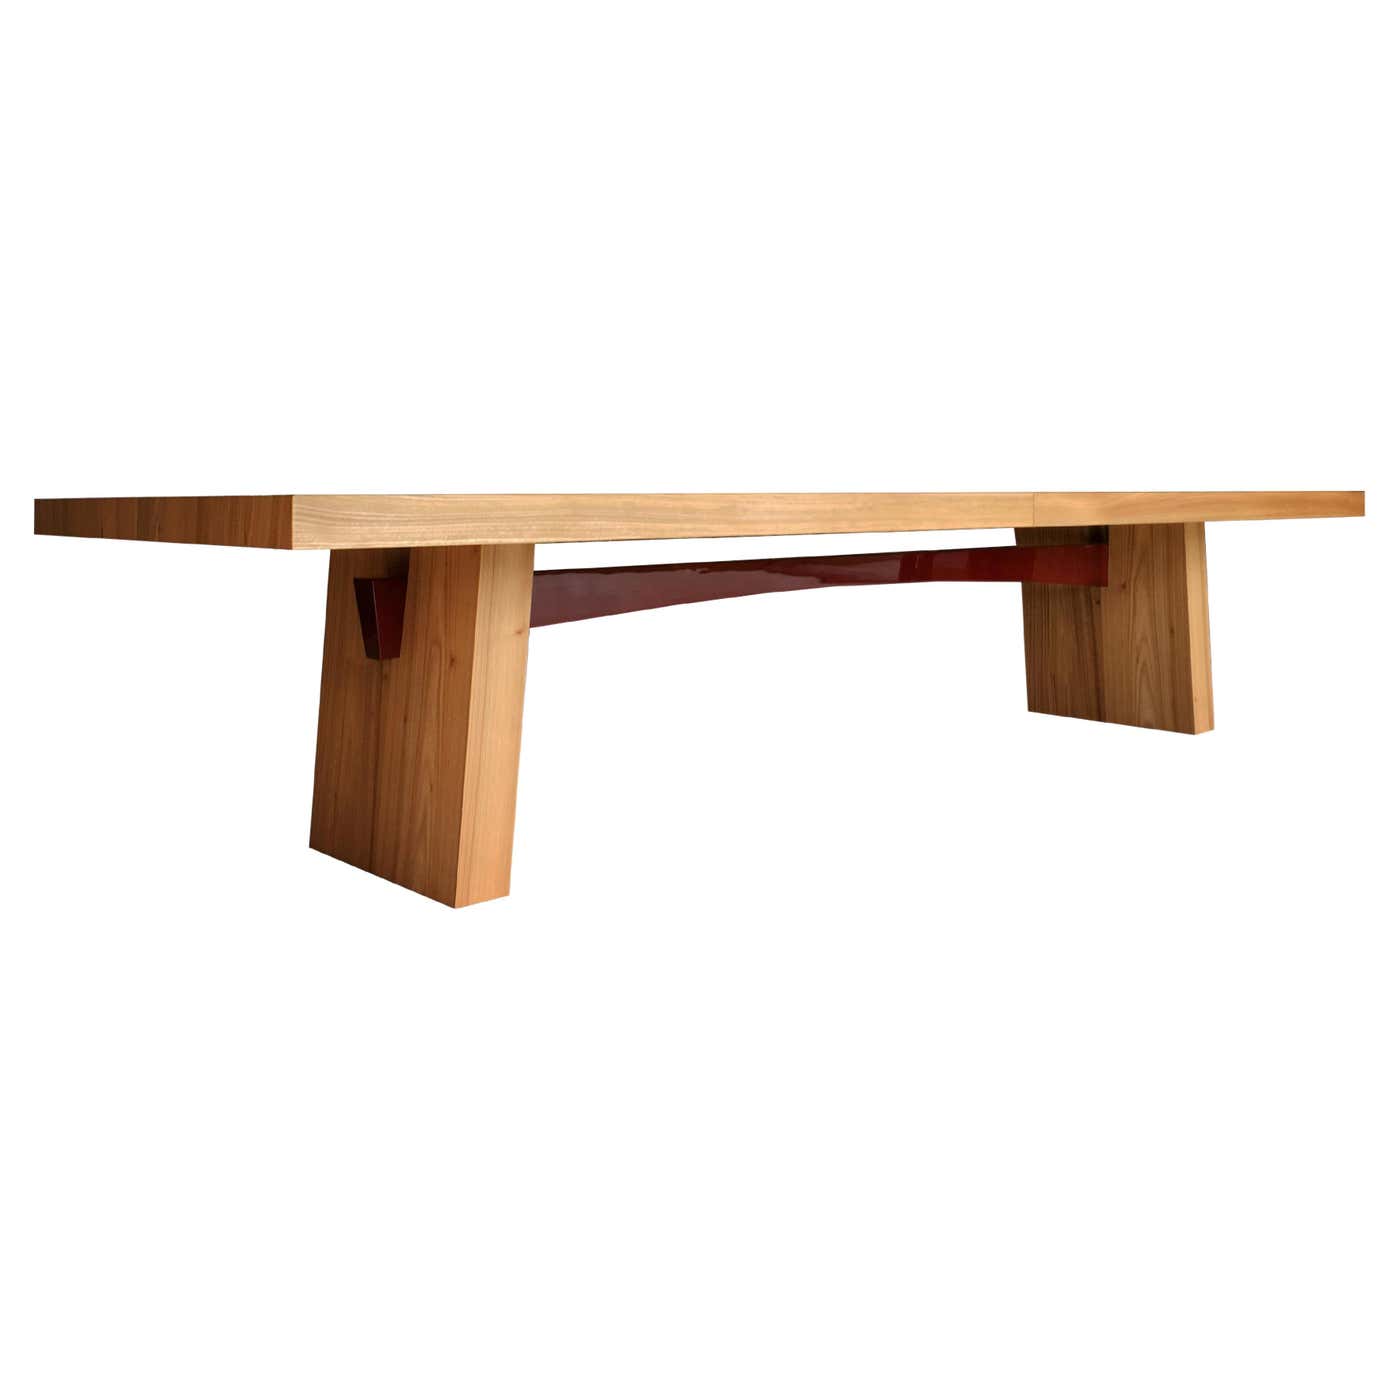 WA, the simple and elegant matt finished dining table For Sale at 1stDibs